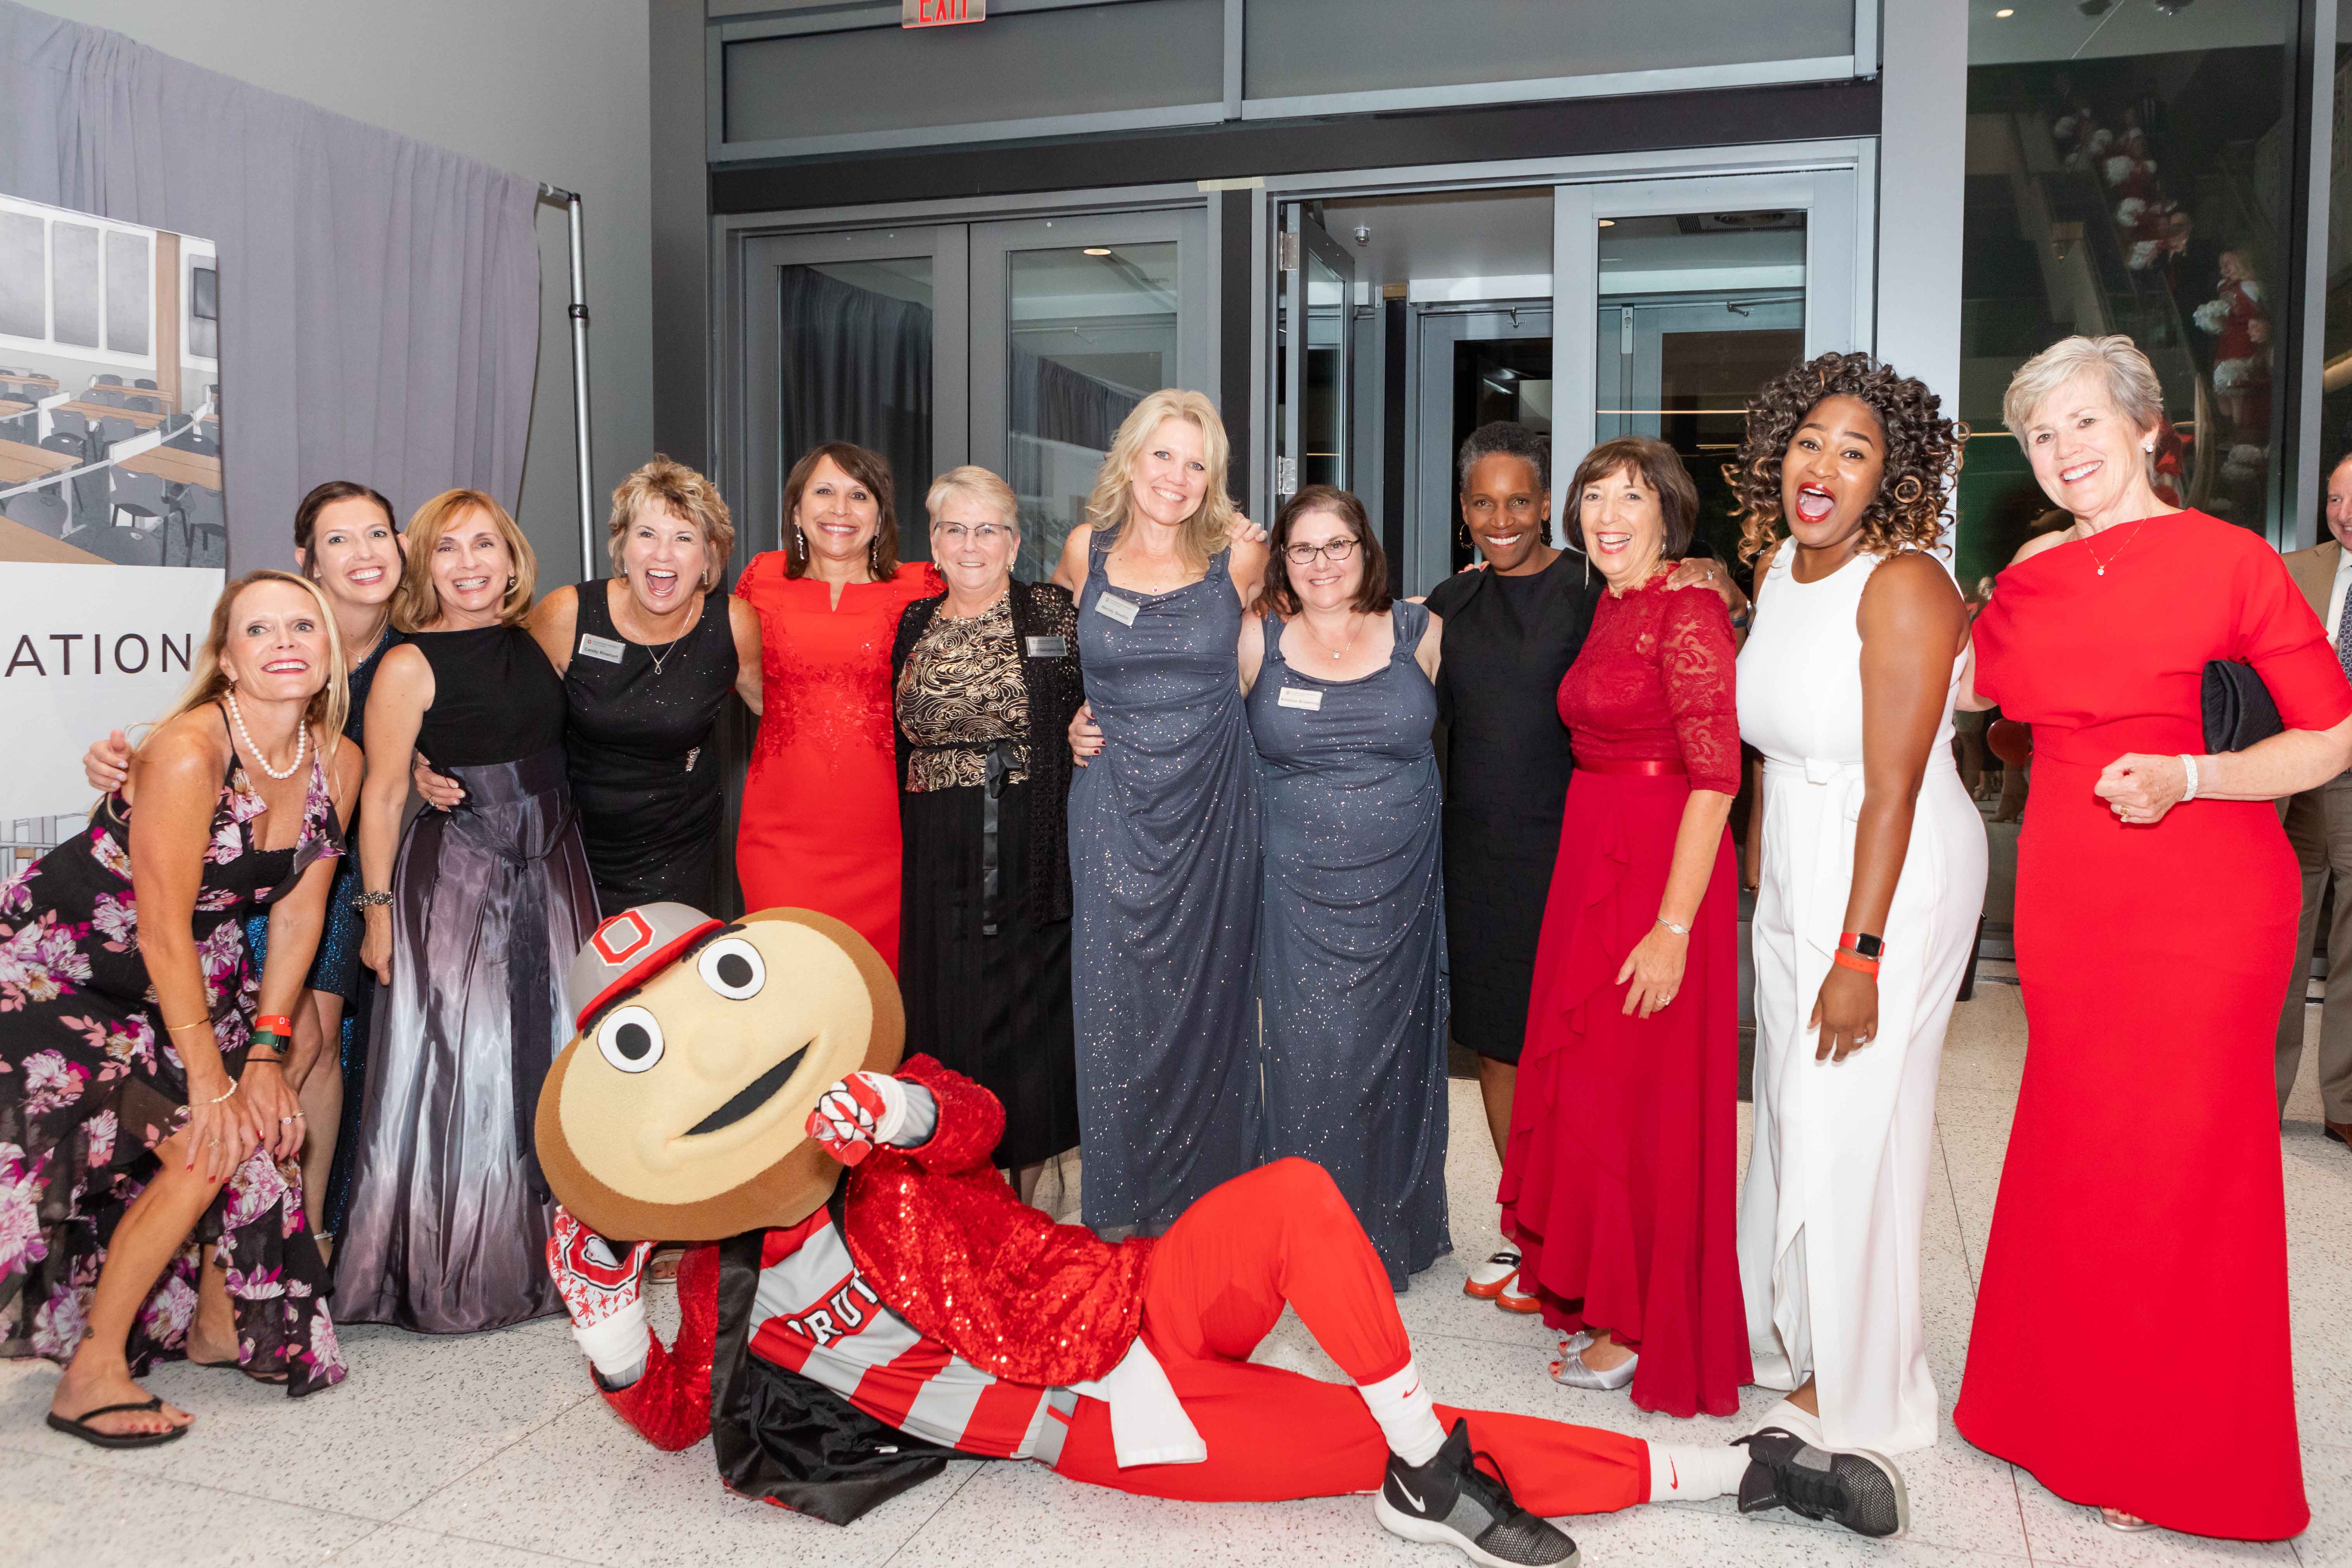 Margaret Graham poses with colleagues at Jane E. Heminger Hall opening gala